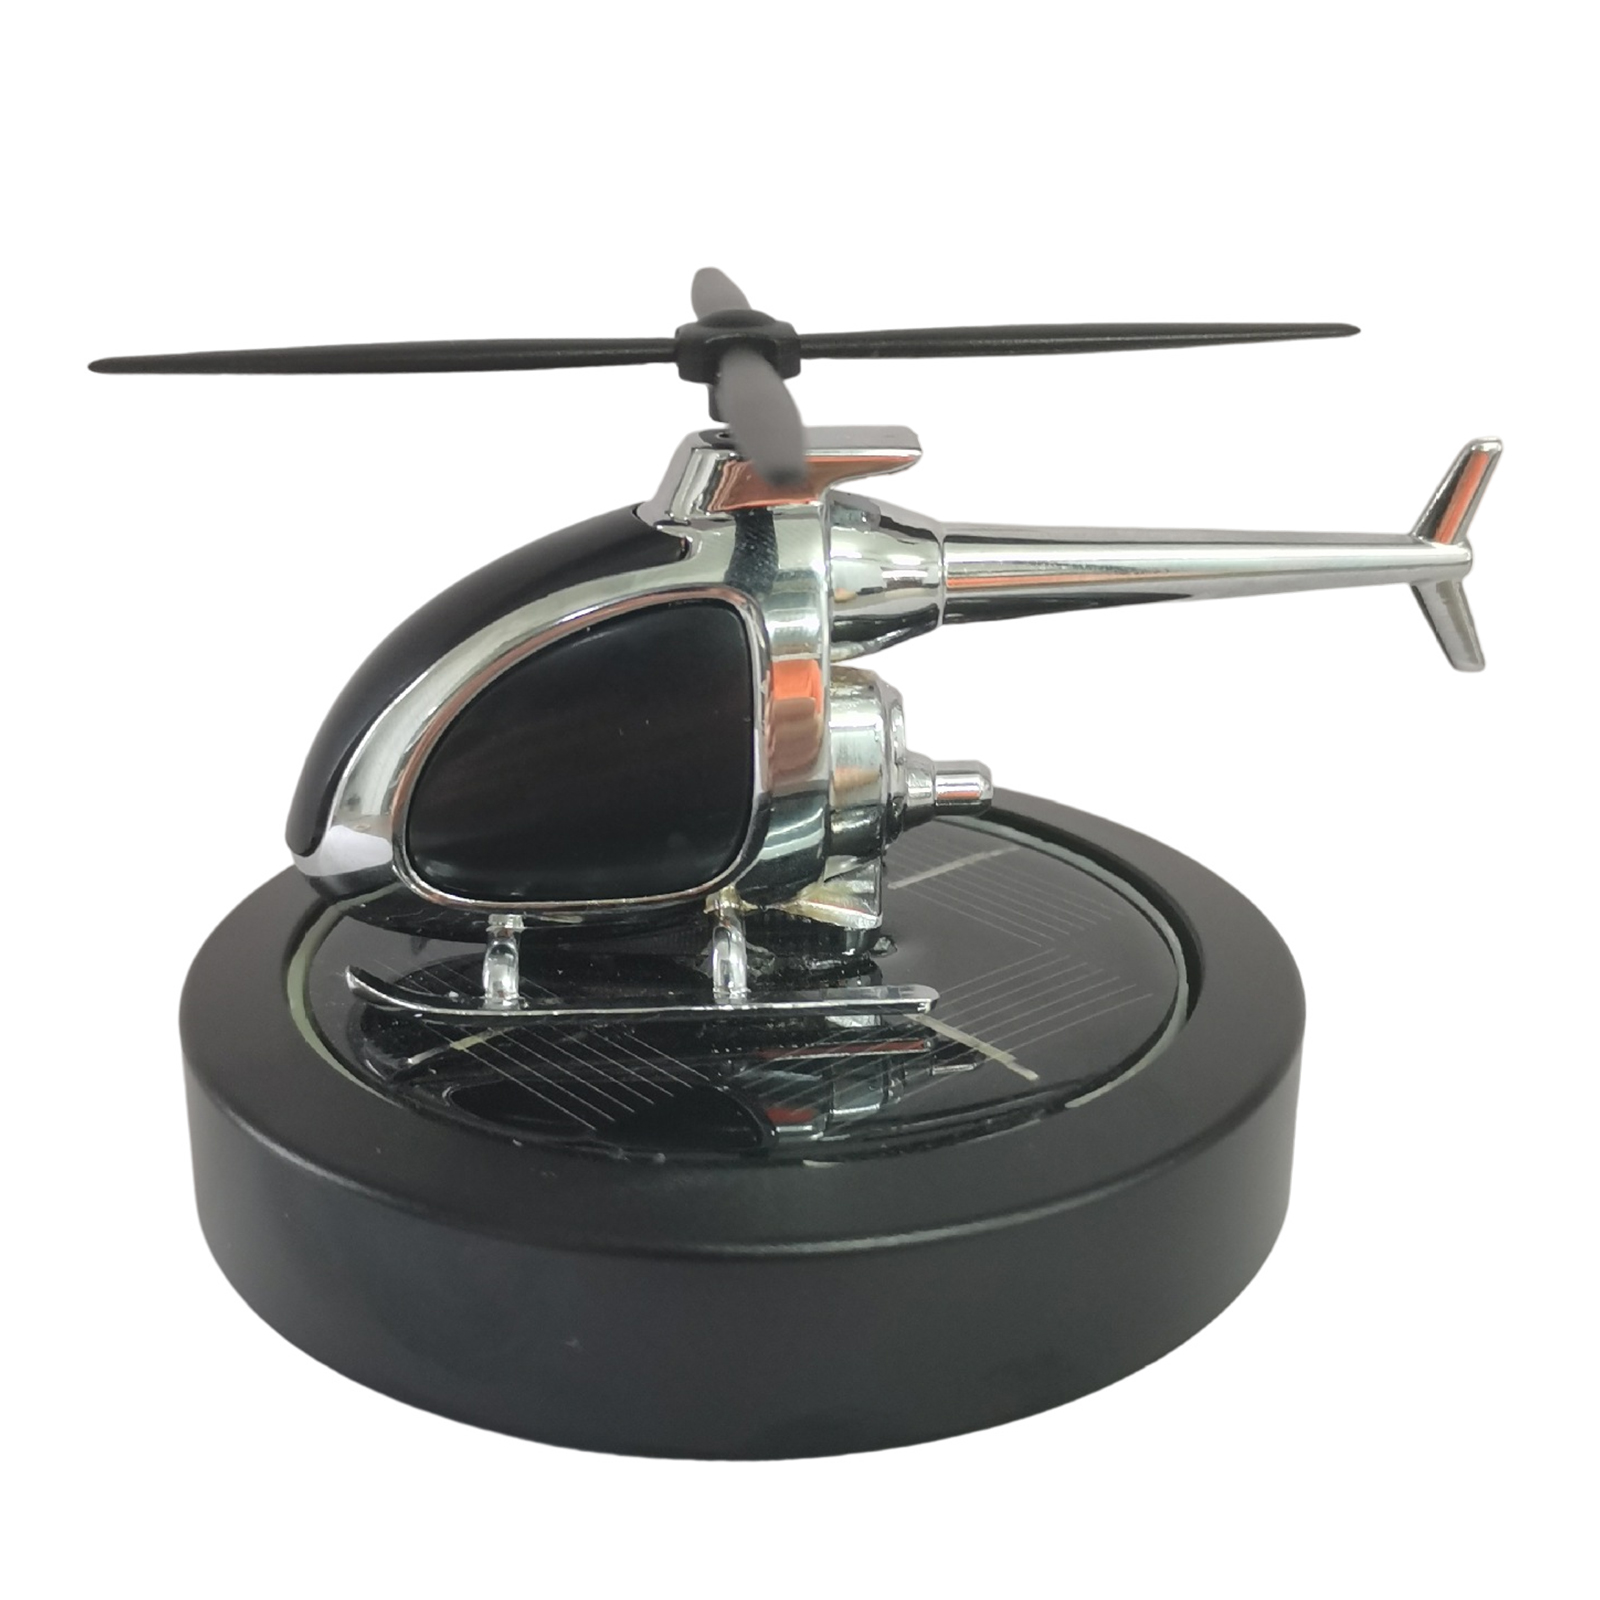 Solar Helicopter Model Car Fragrance Aroma Diffuser Novelty Ornaments Decor Air Freshener For Office Home Auto